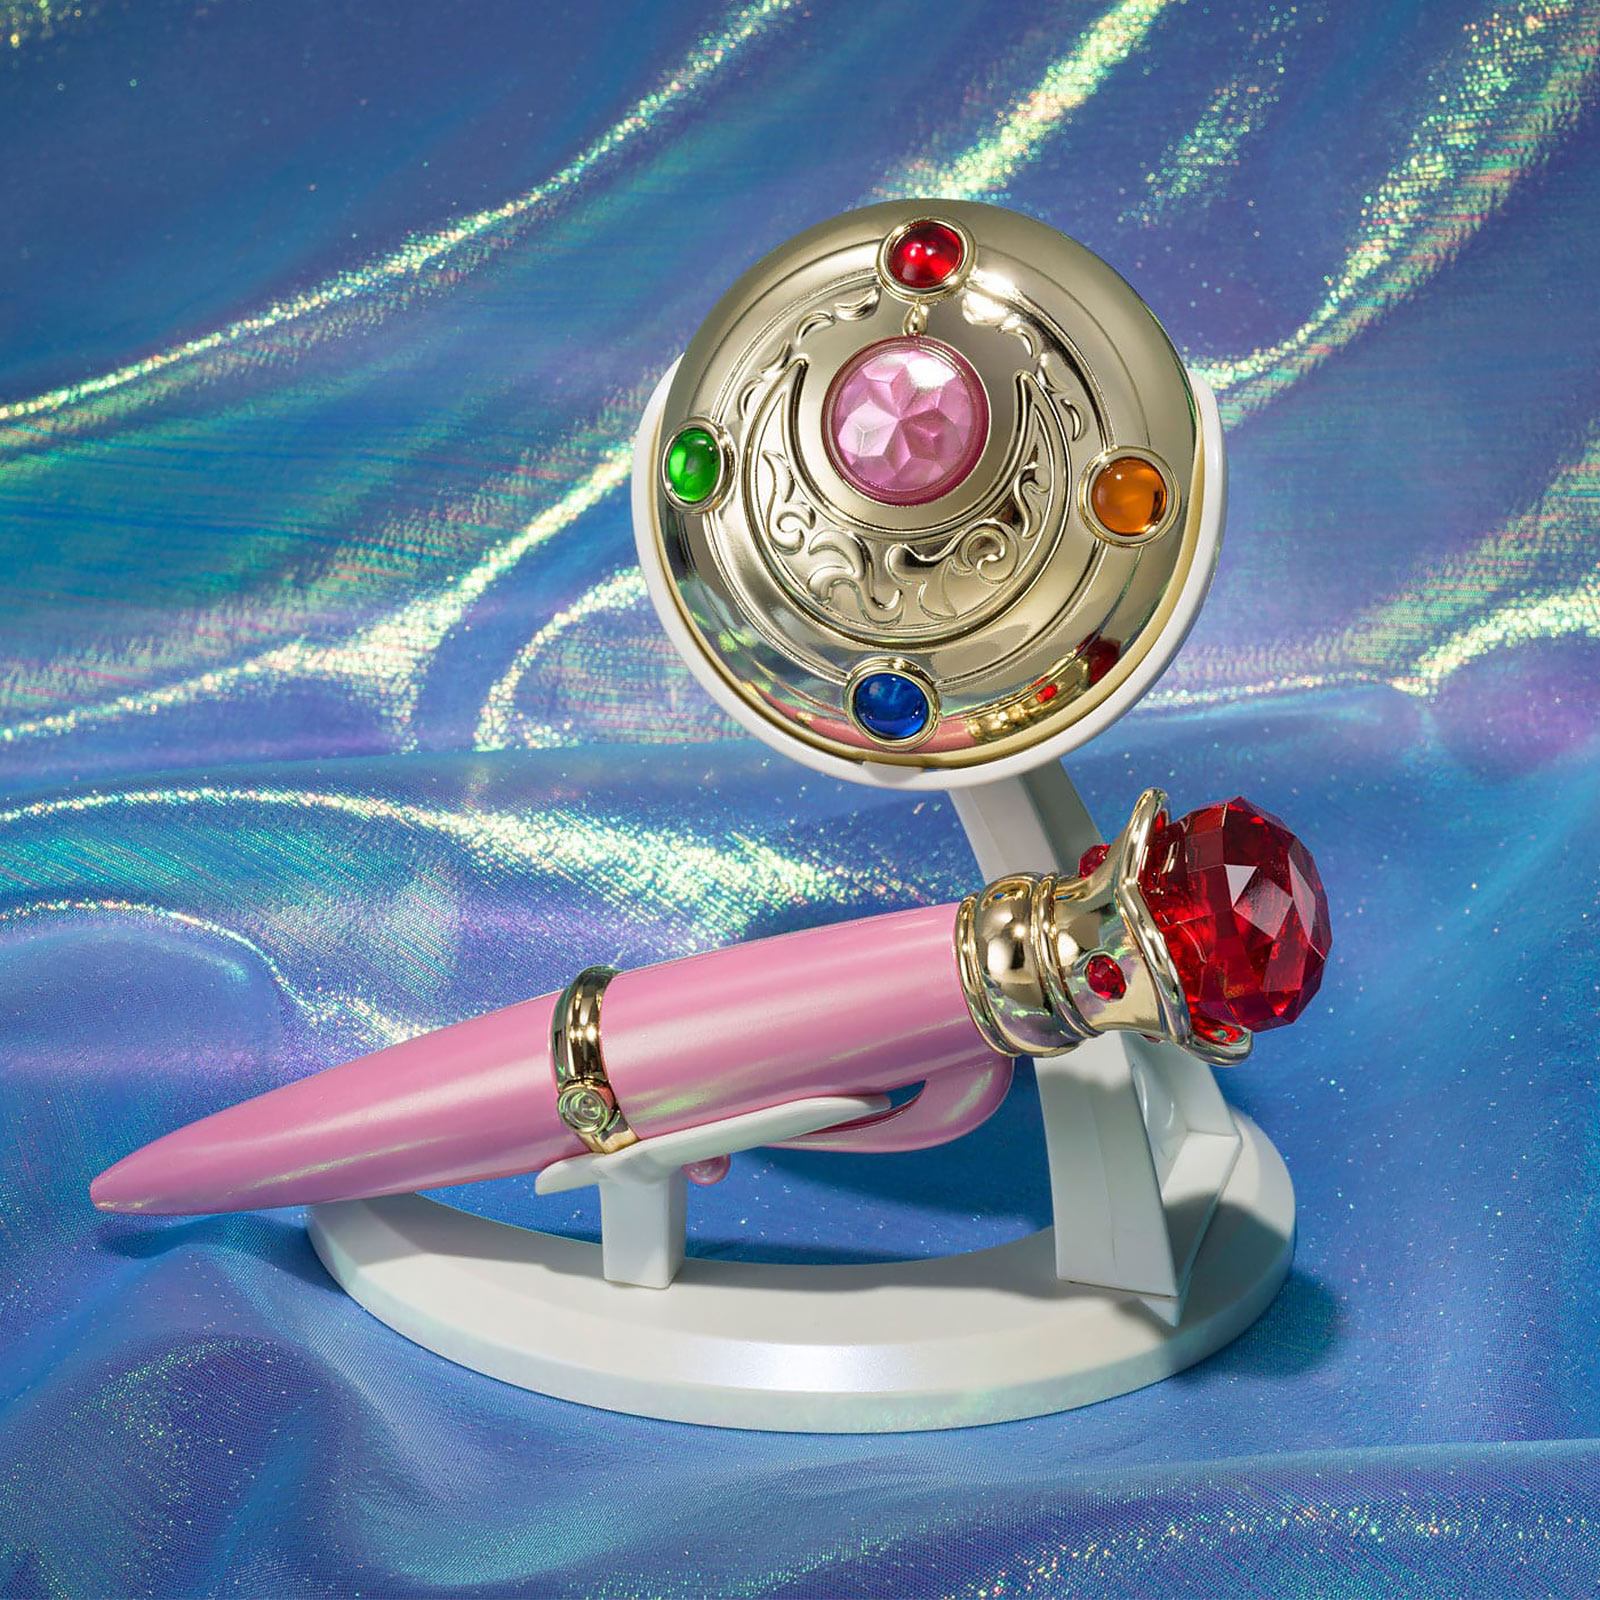 Sailor Moon - Transformation Brooch & Transformation Pen with Light and Sound Effects